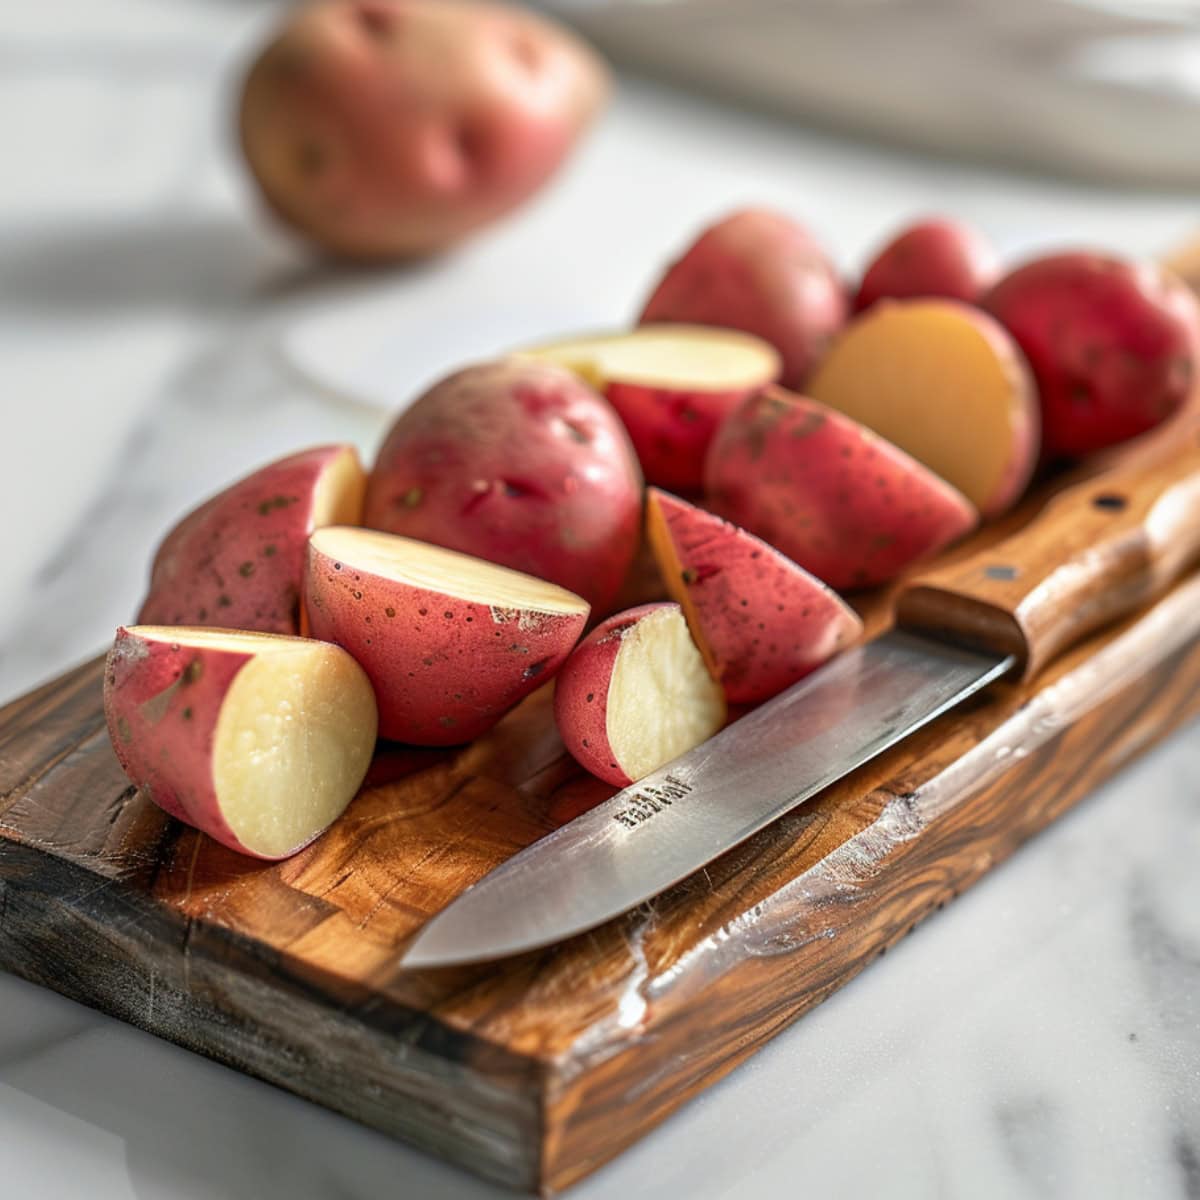 Sliced red potatoes on a wooden board.